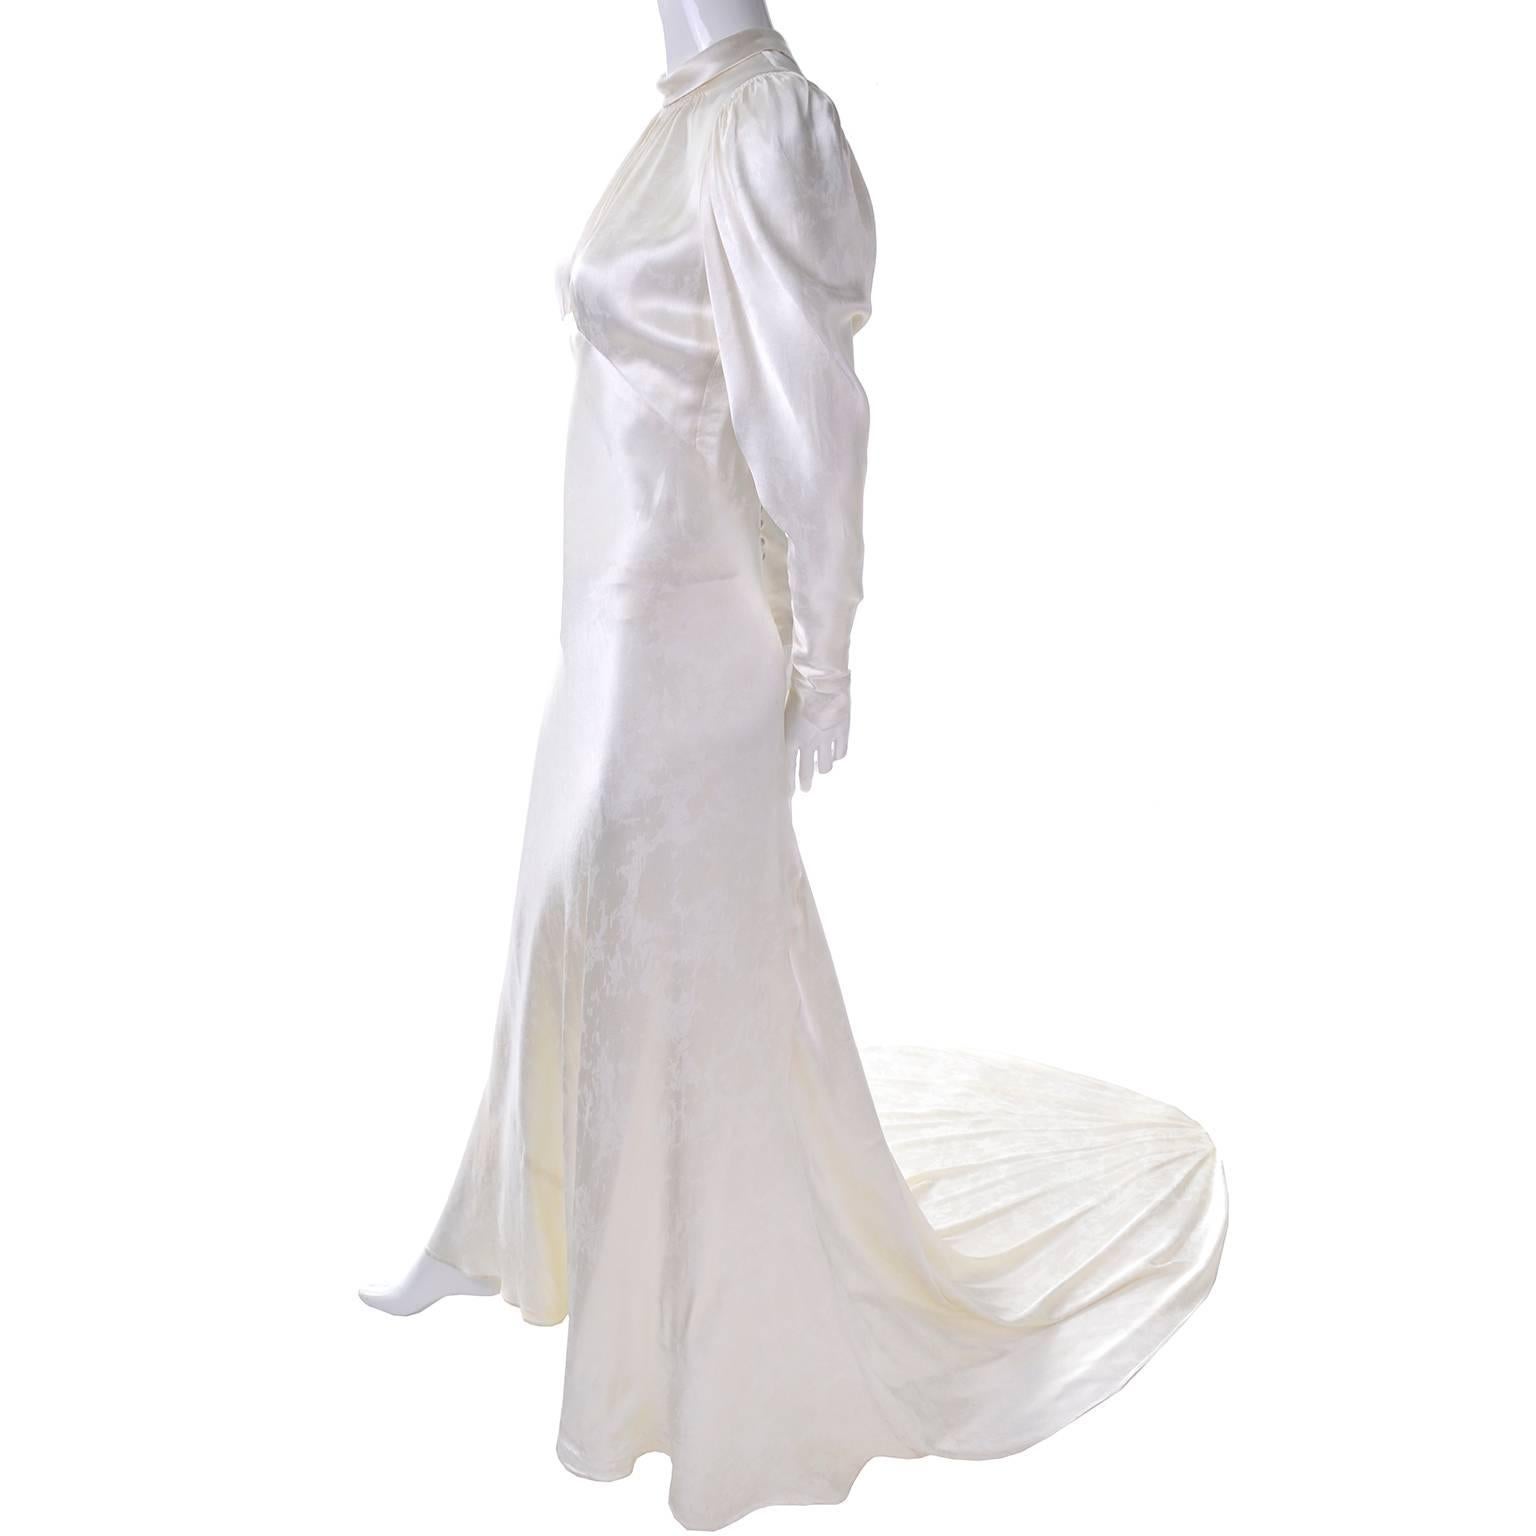 Gray 1930s Vintage Ivory Silk Satin Wedding Dress with Train and High Neck